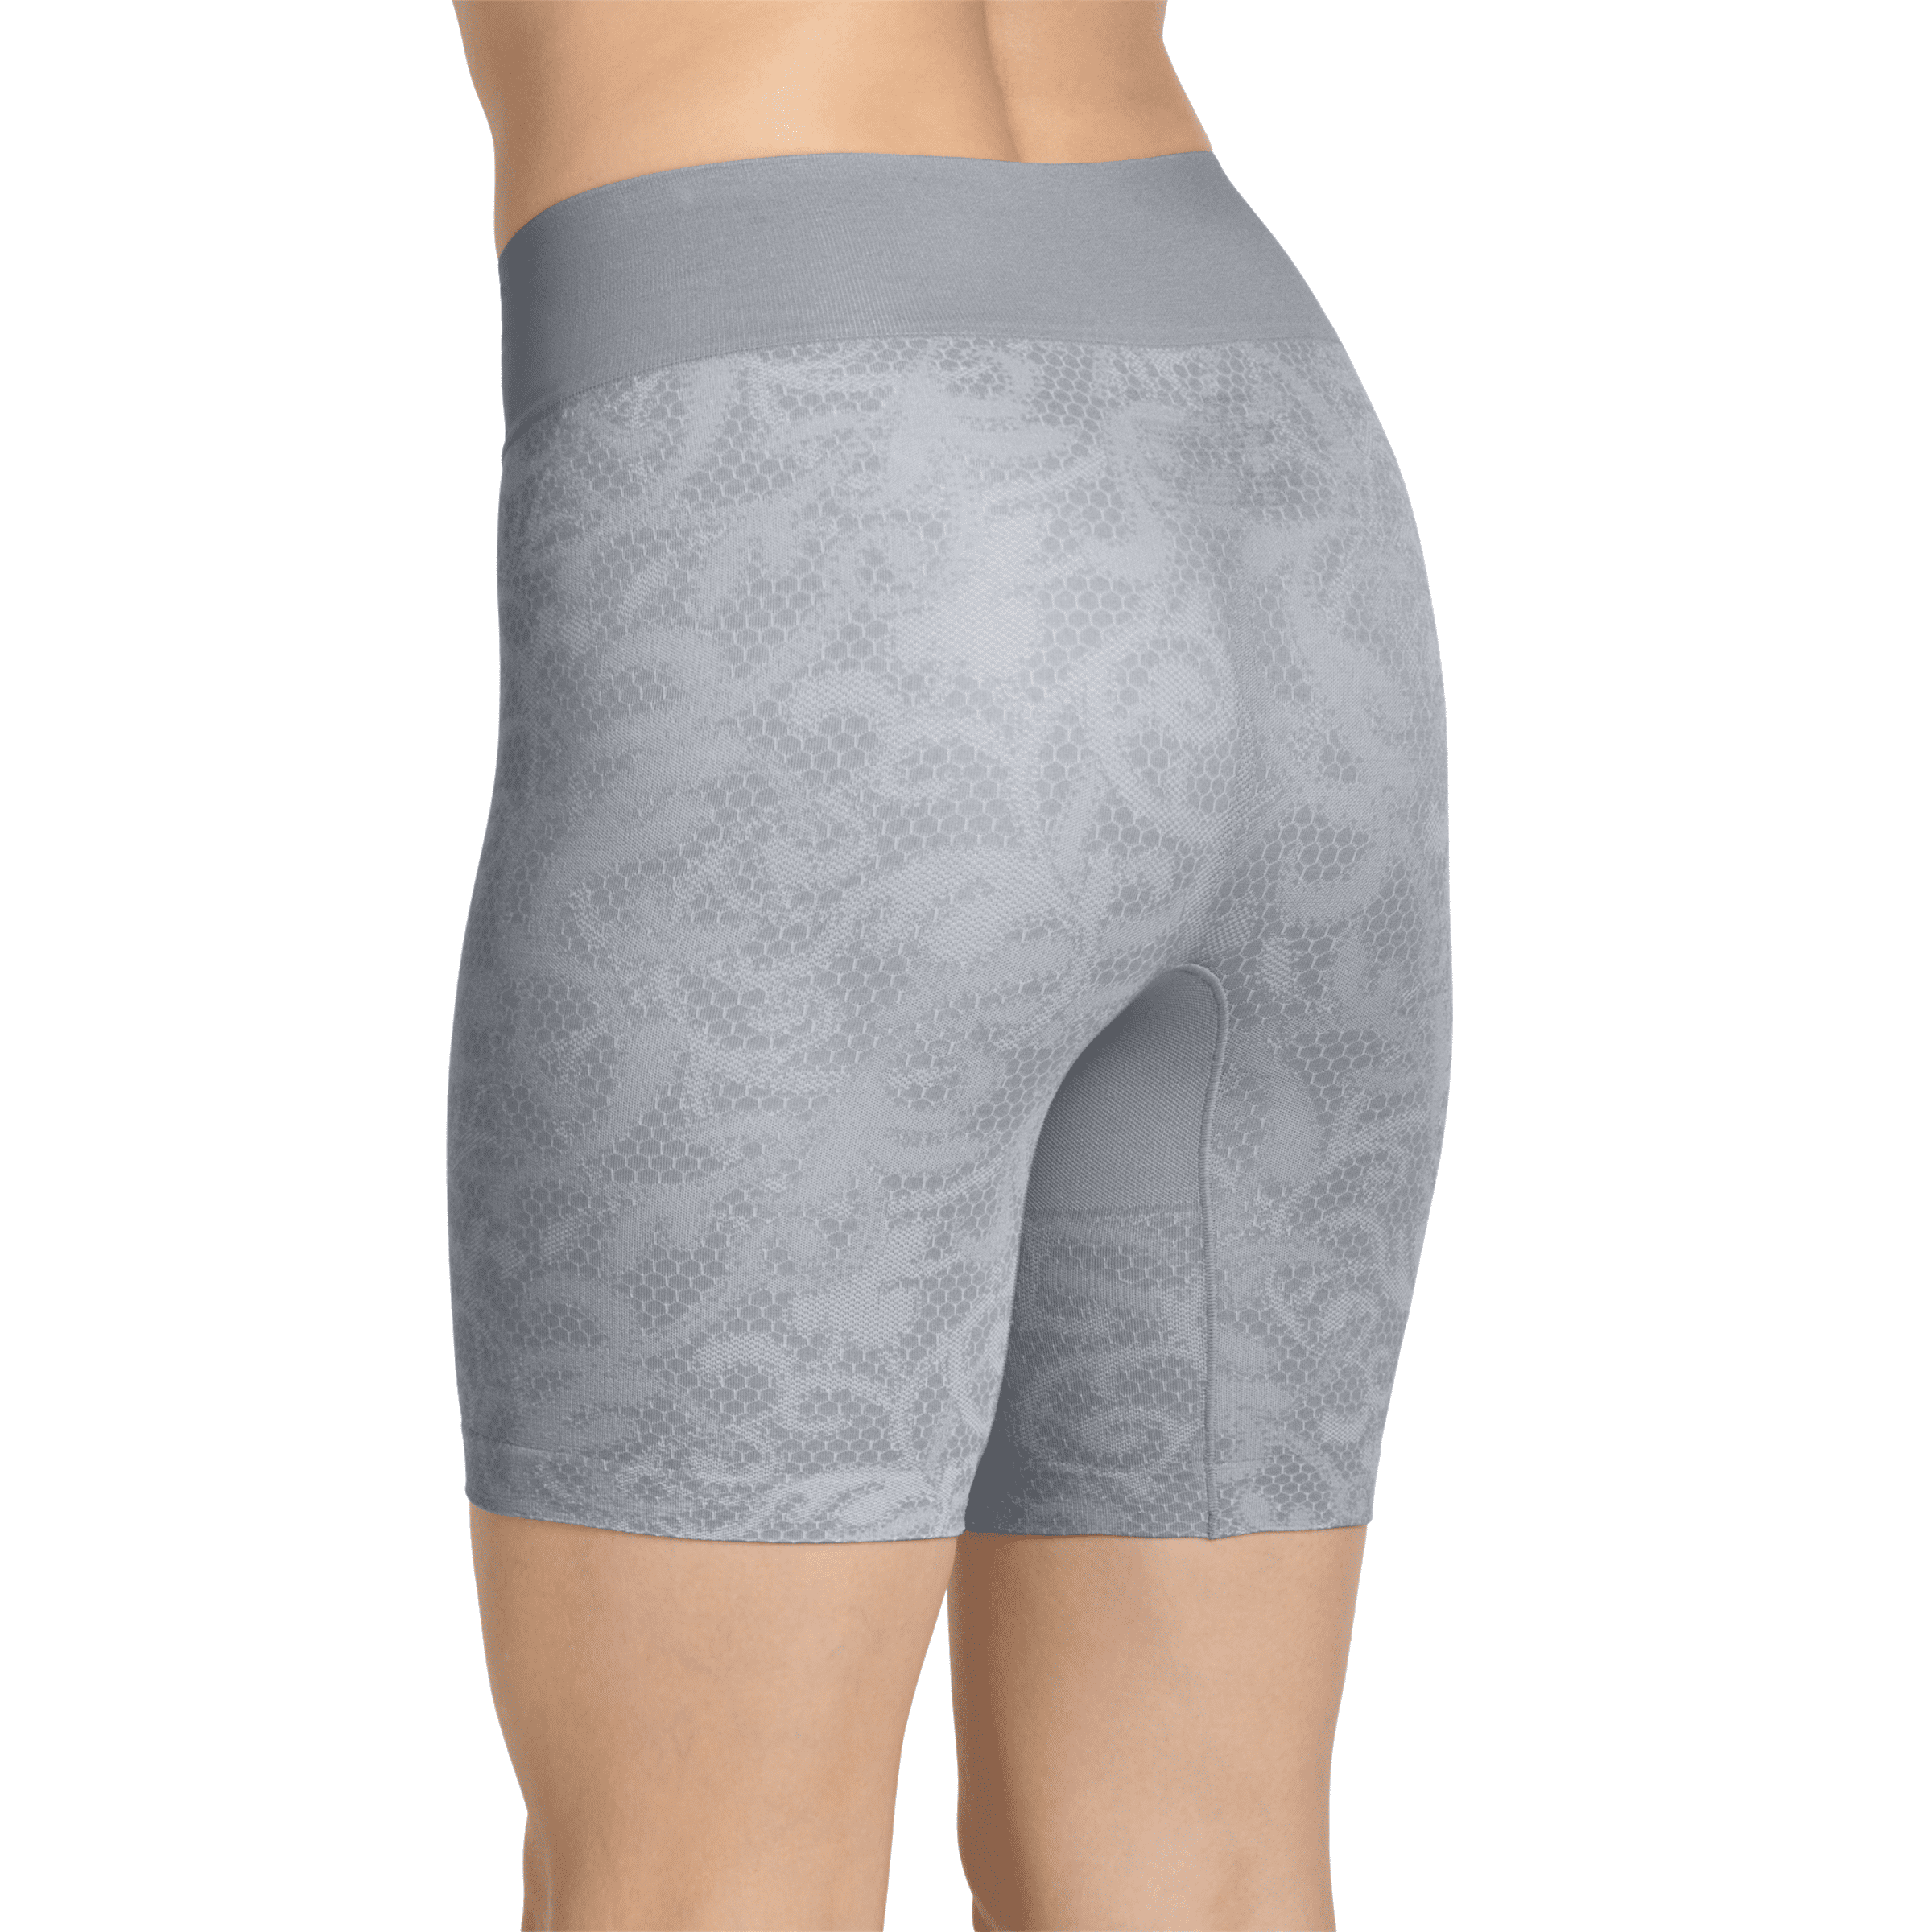 Jockey® Essentials No-Chafe Cool Touch Slipshort, Smoothing